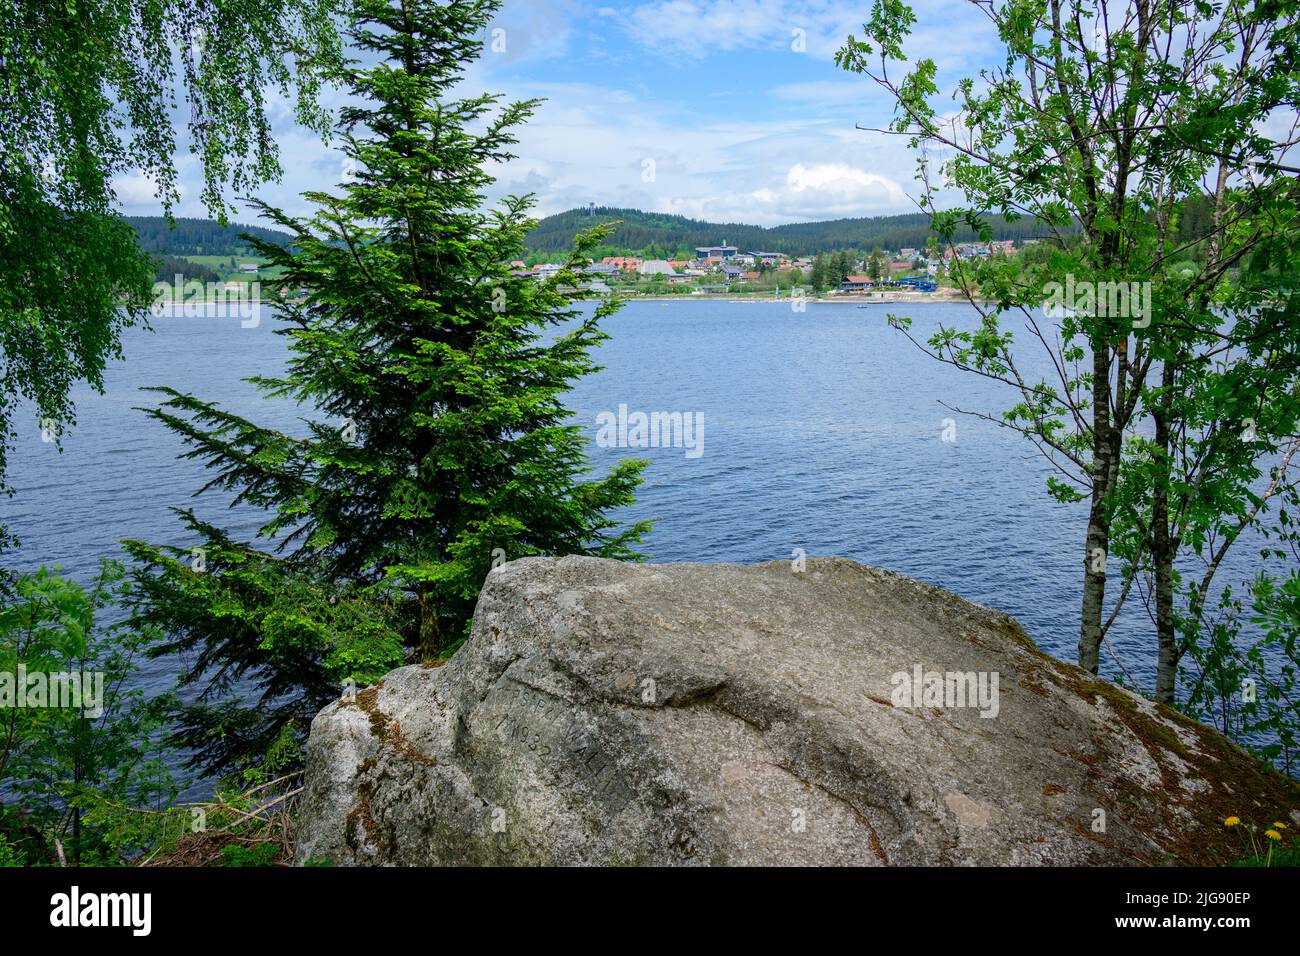 Germany, Baden-Wuerttemberg, Black Forest, view of Schluchsee village. Stock Photo